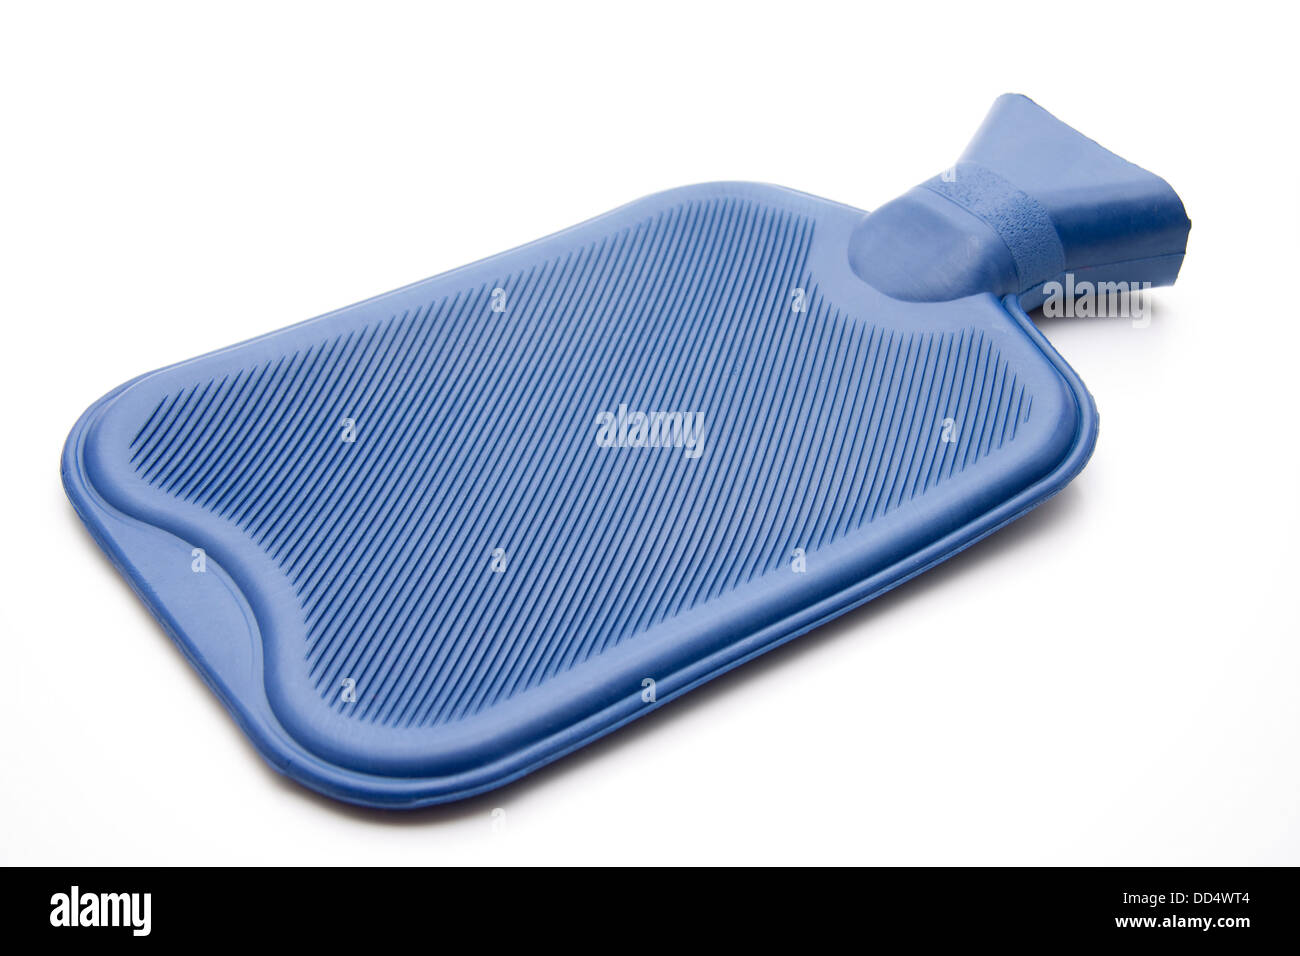 Elastic Bottle High Resolution Stock Photography and Images - Alamy